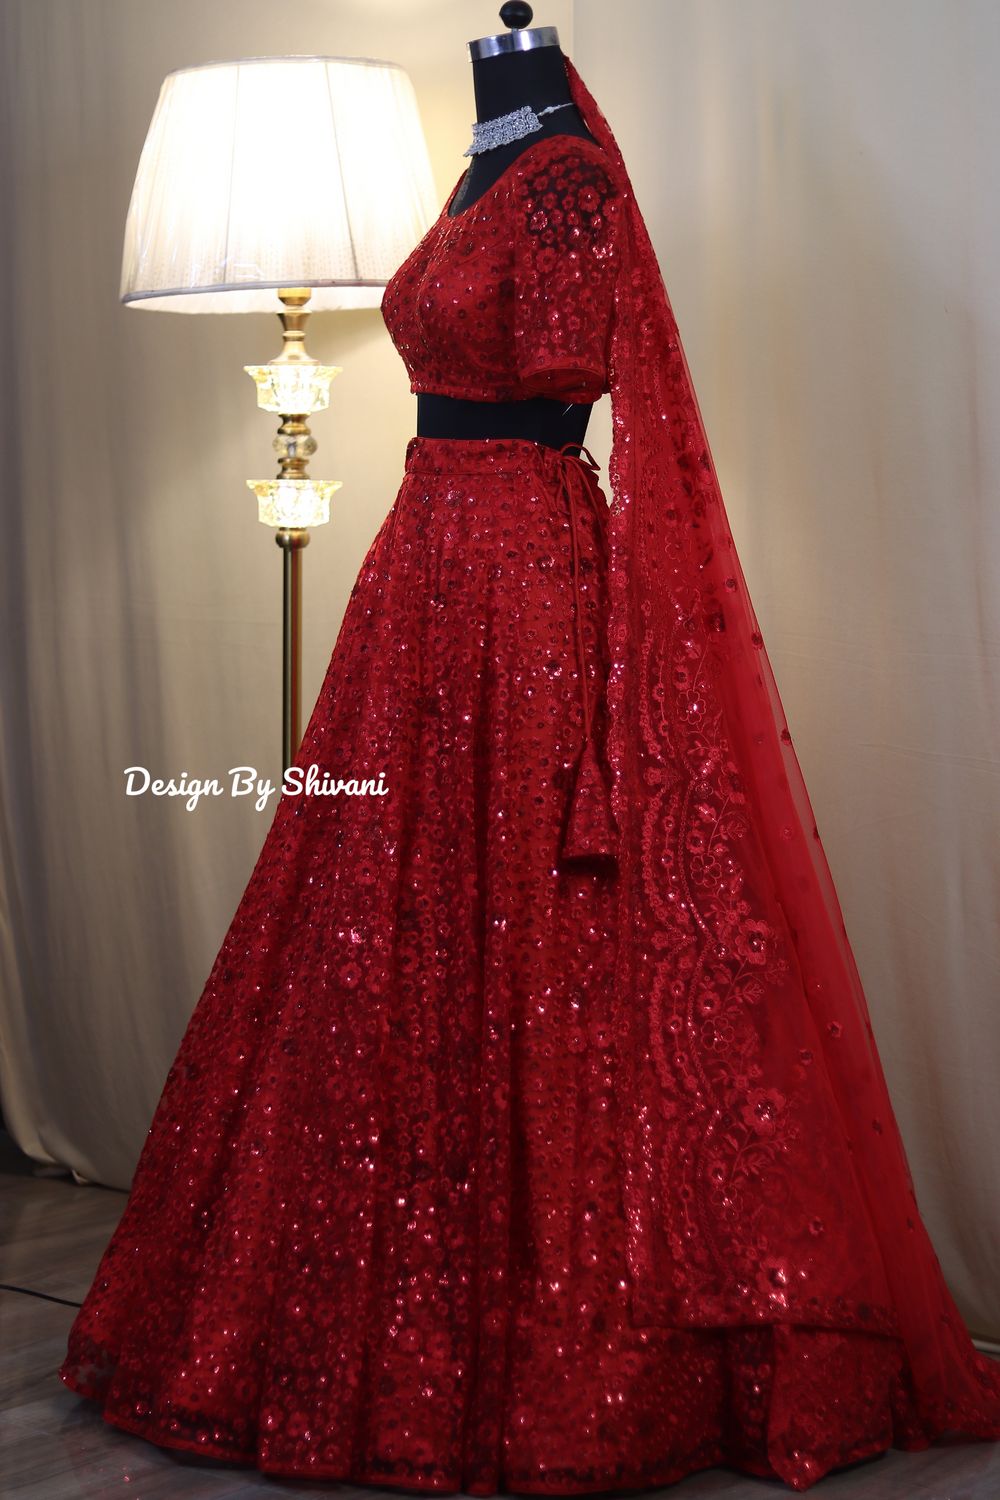 Photo From Red Lehenga - By Design by Shivani